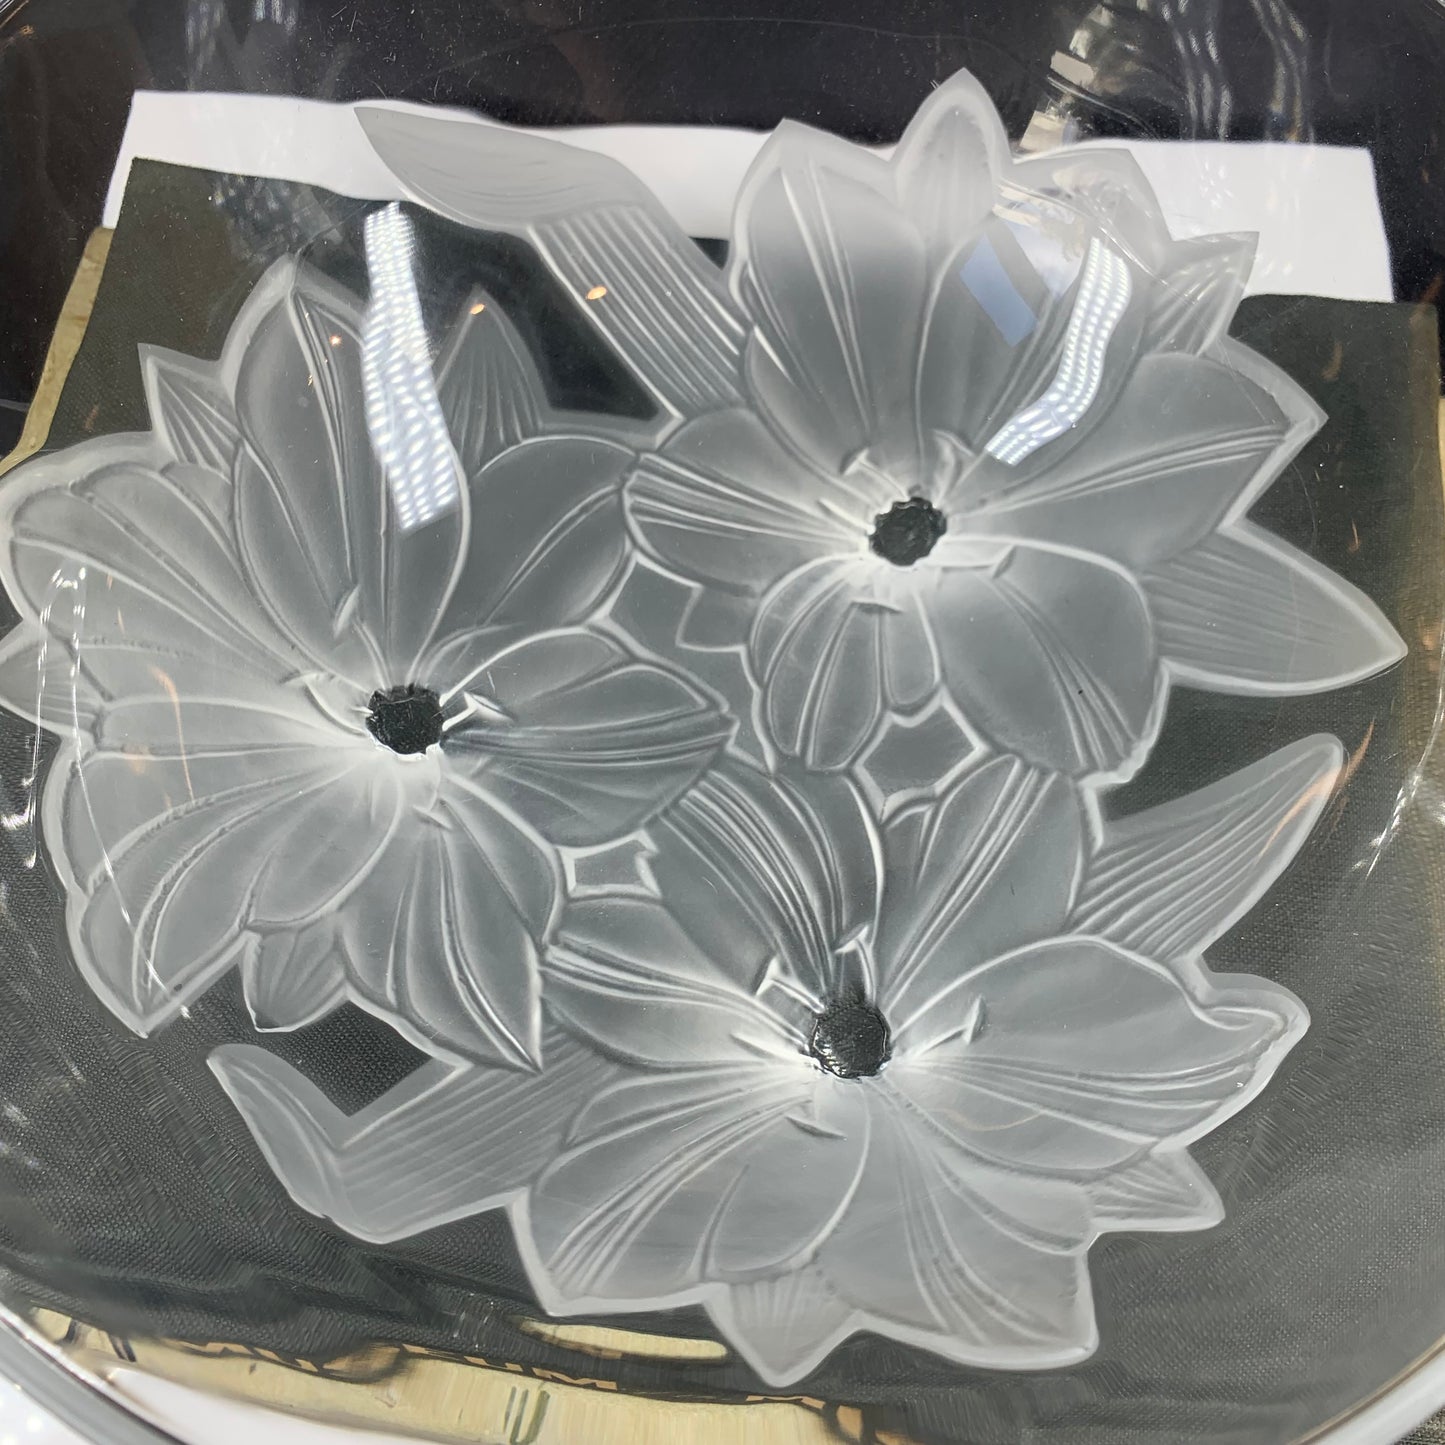 Retro French Durand glass salad bowl with frosted glass floral motif base